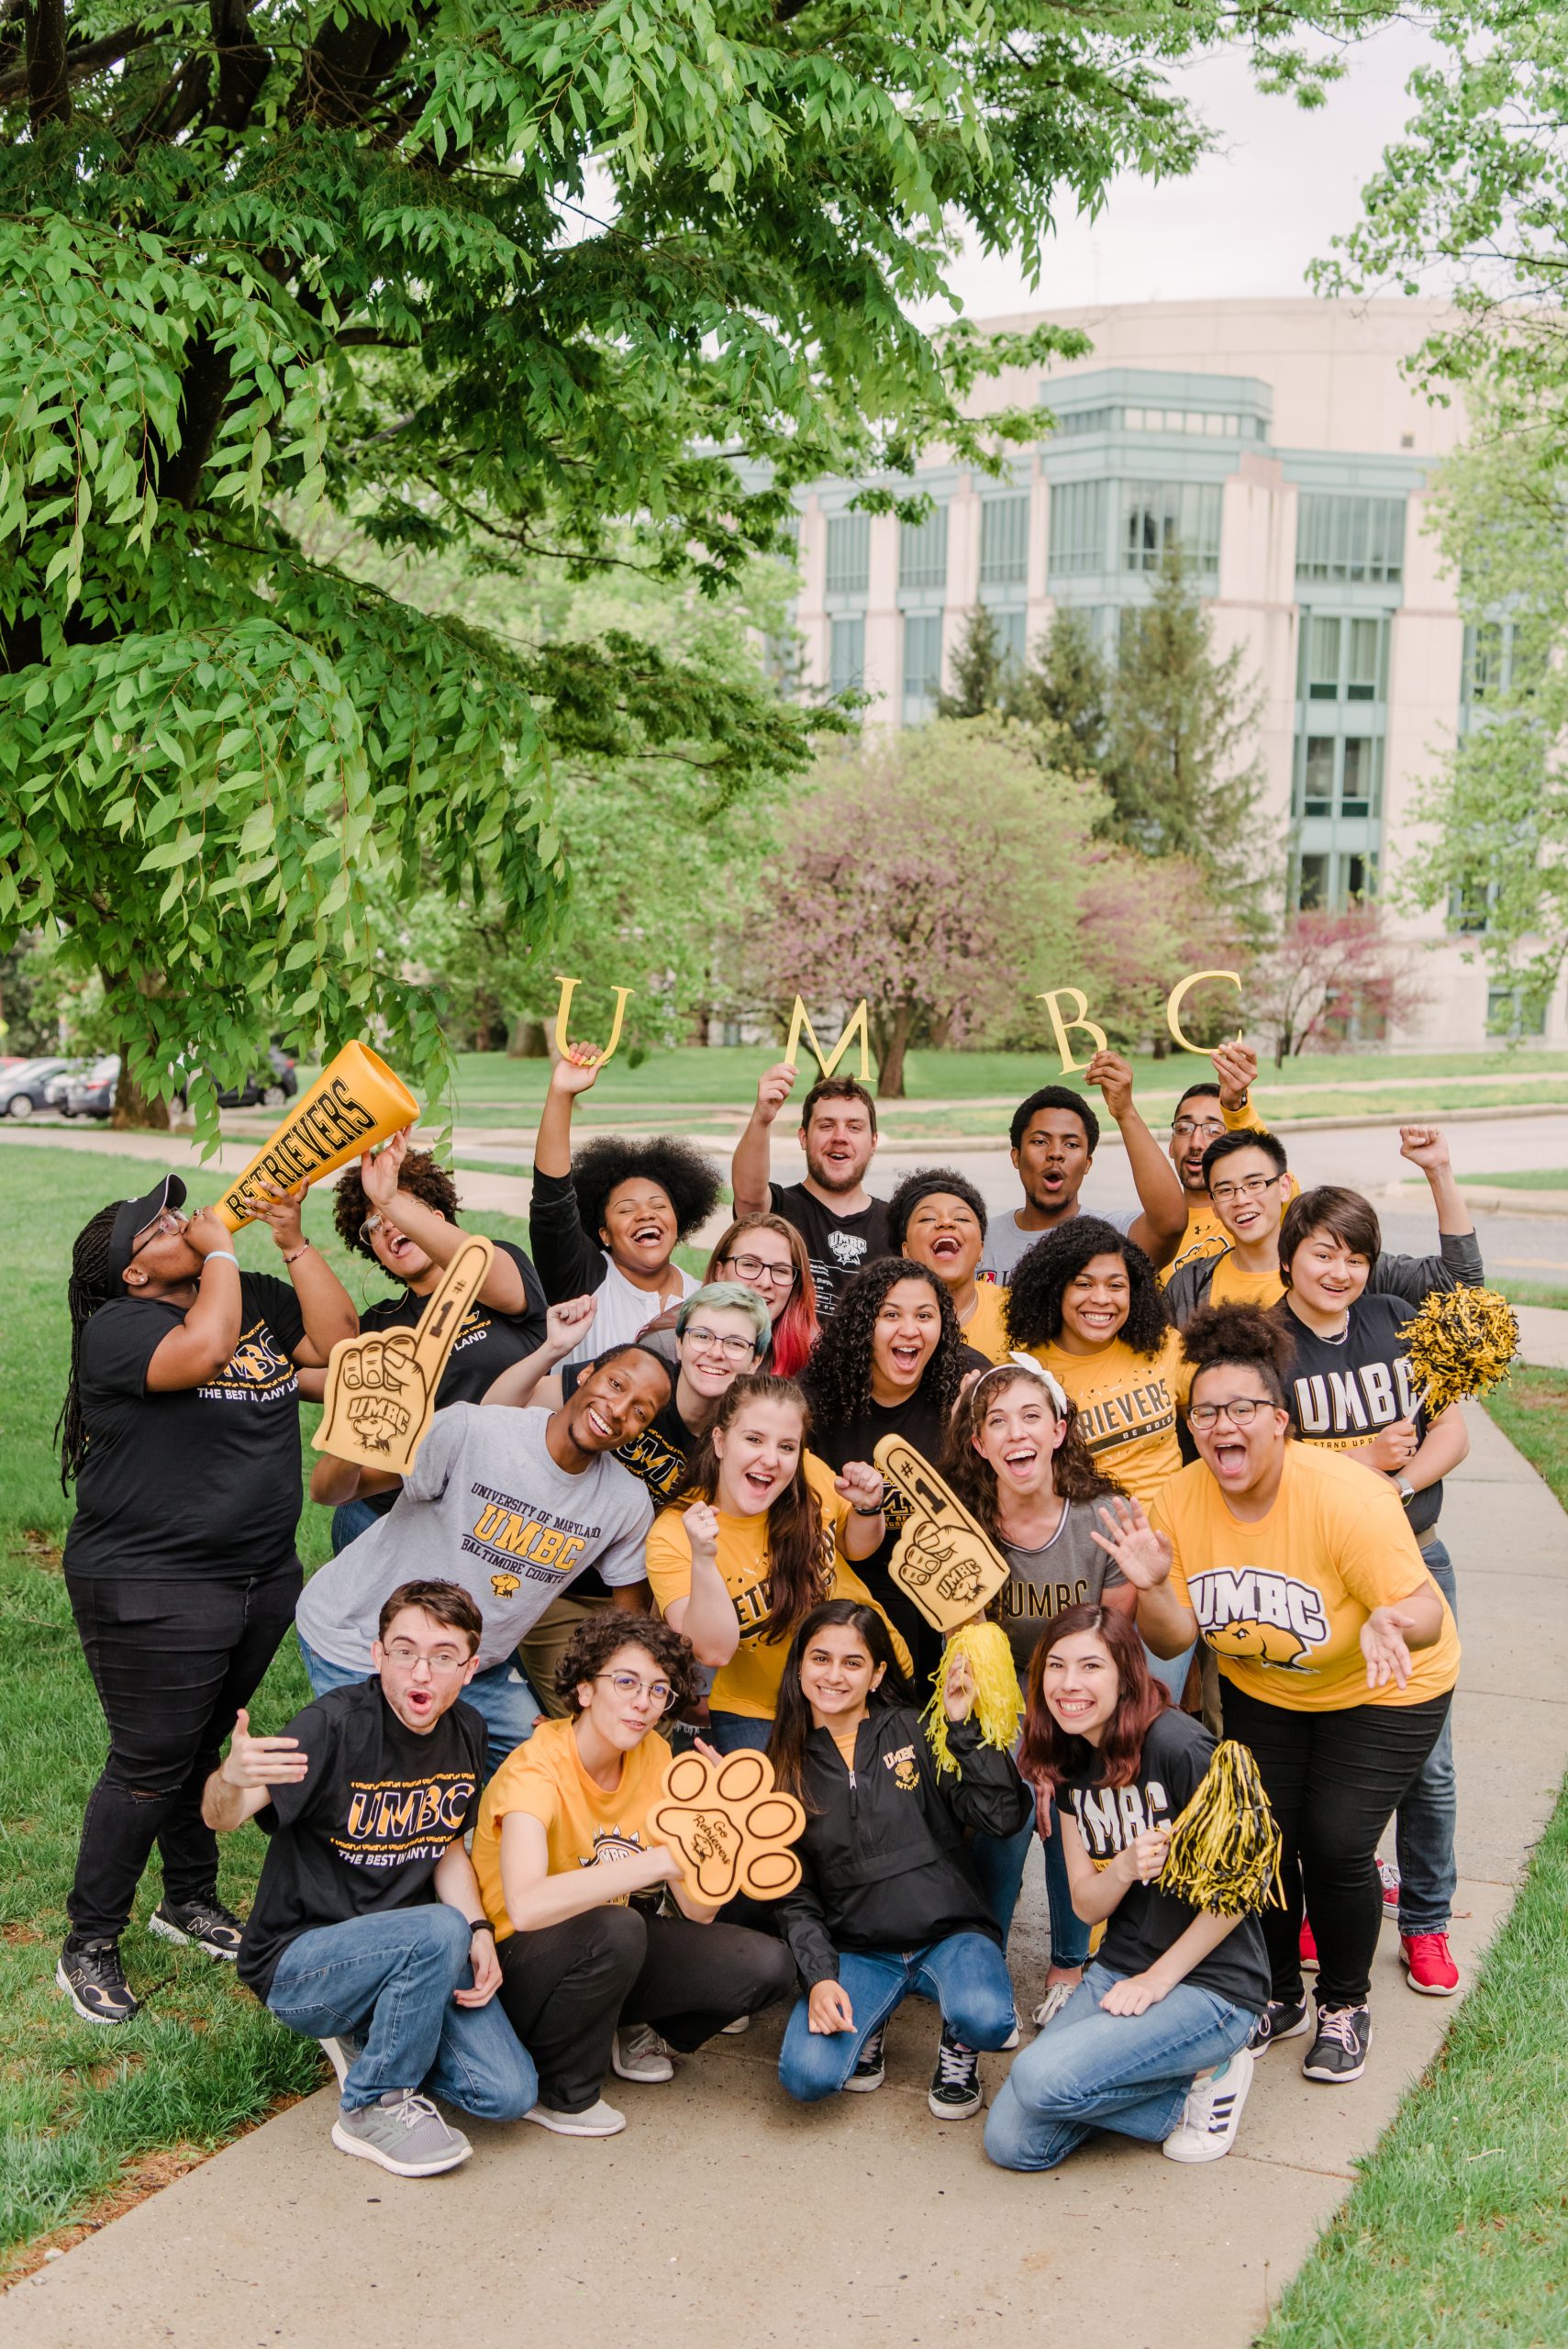 A diverse group of young men and women, joyfully showing their UMBC student community spirit.